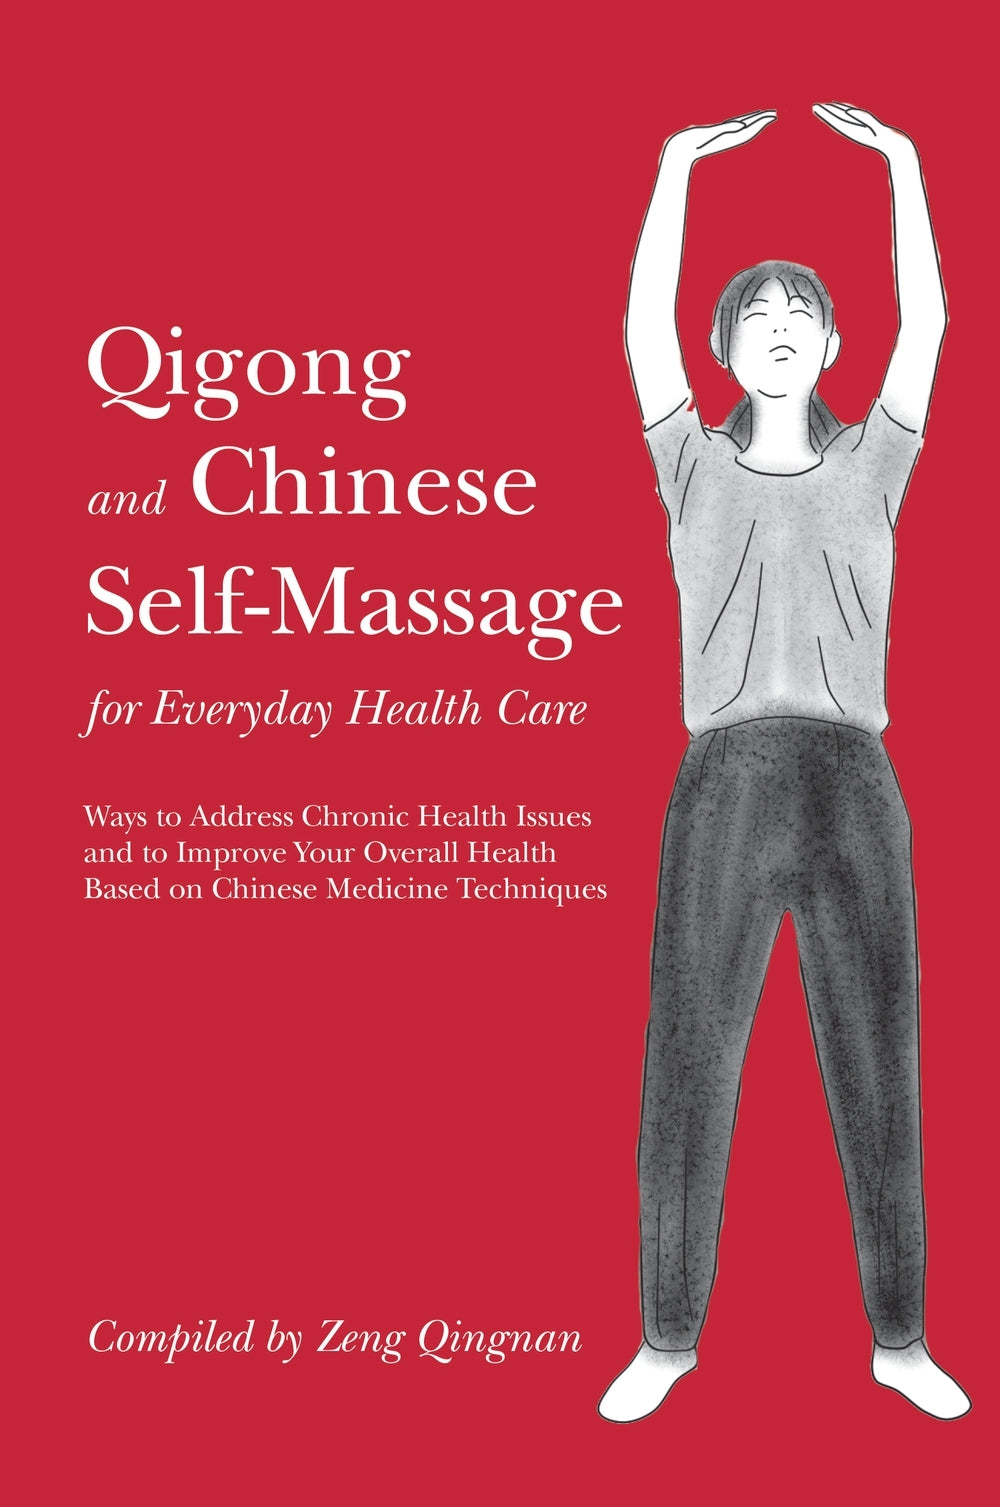 Qigong and Chinese Self-Massage for Everyday Health Care by Zeng Qingnan